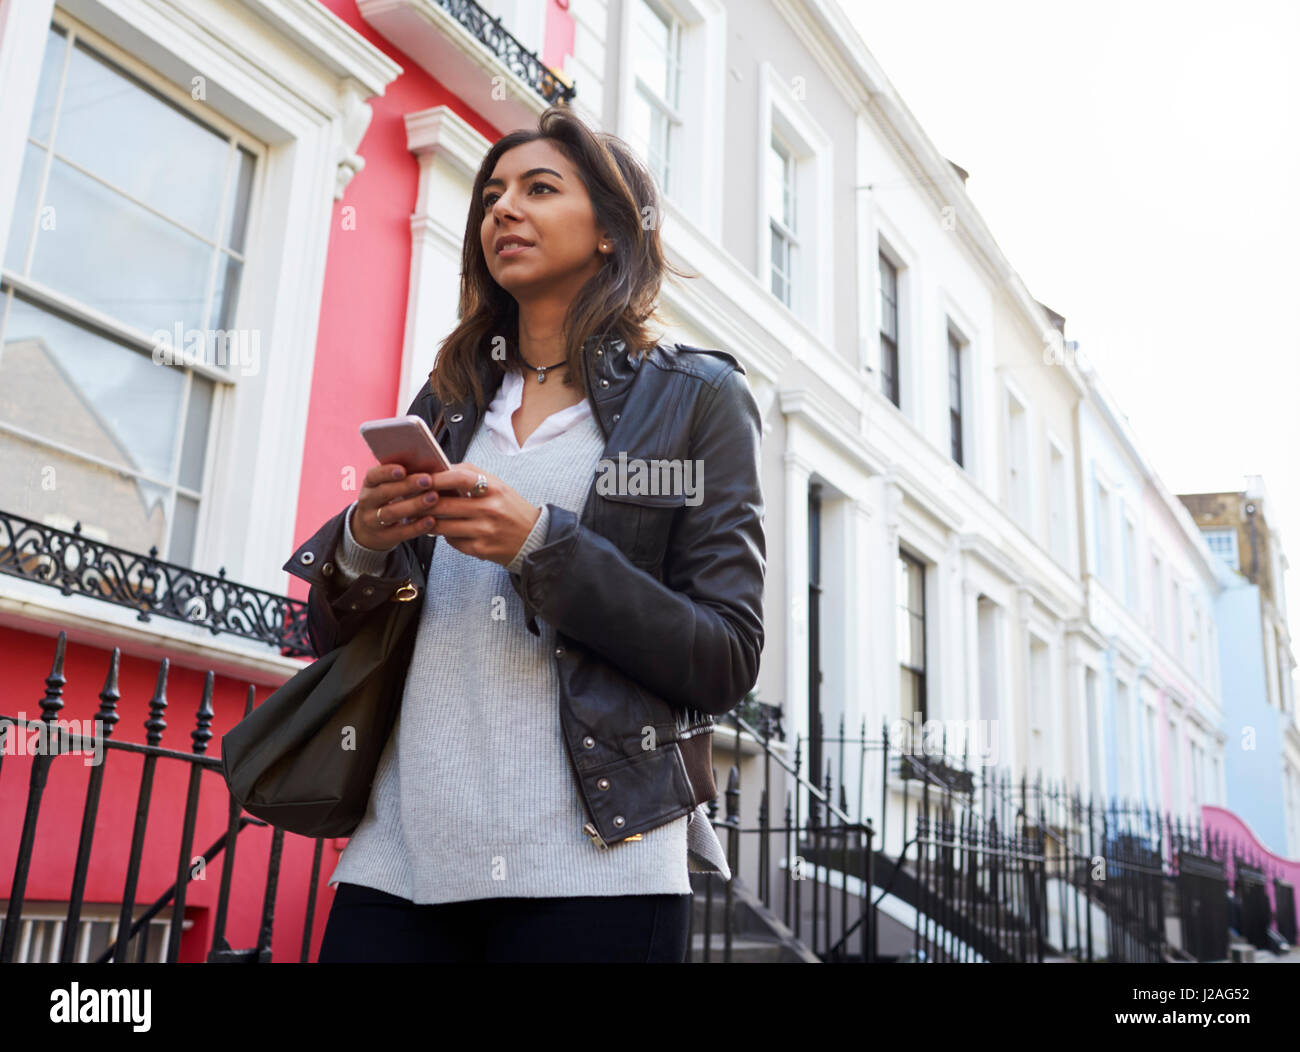 Low angle view of a young woman using mobile phone in street Stock Photo